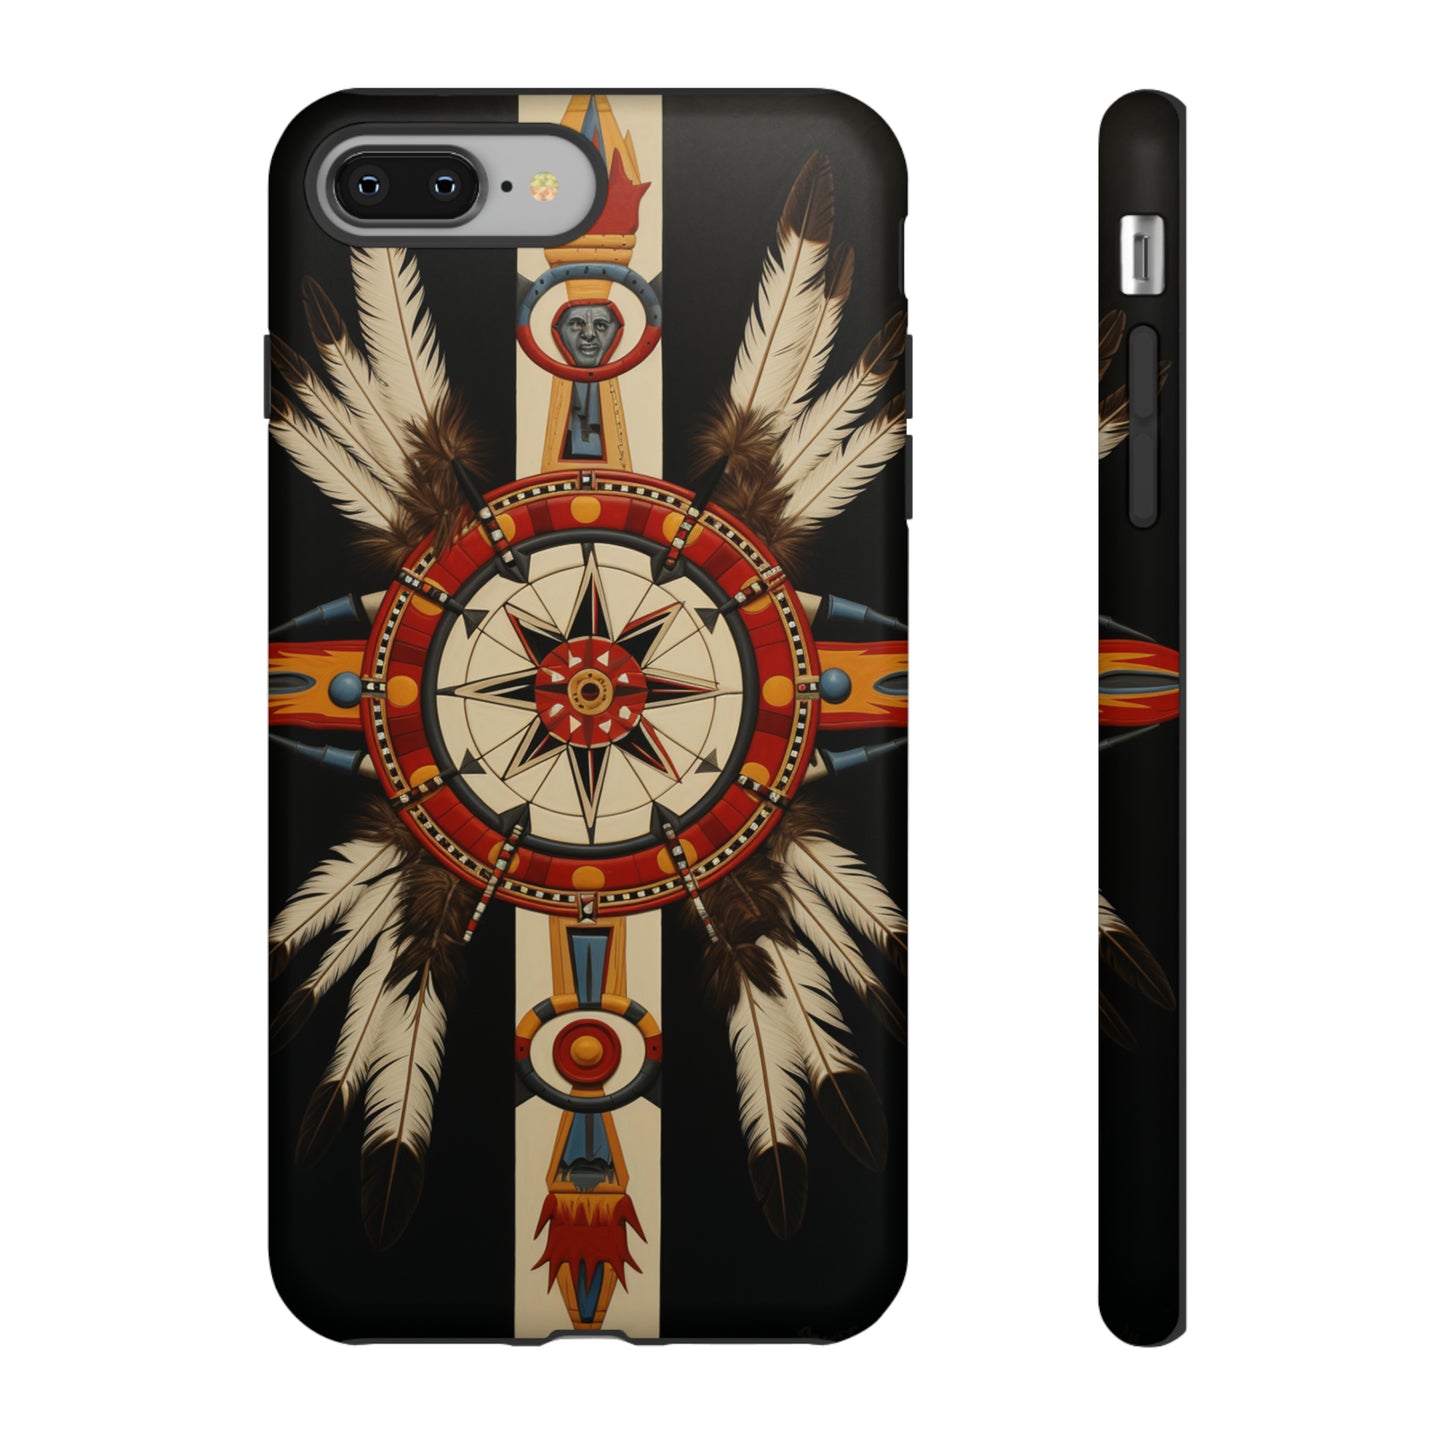 Indian medicine wheel phone cover for iPhone